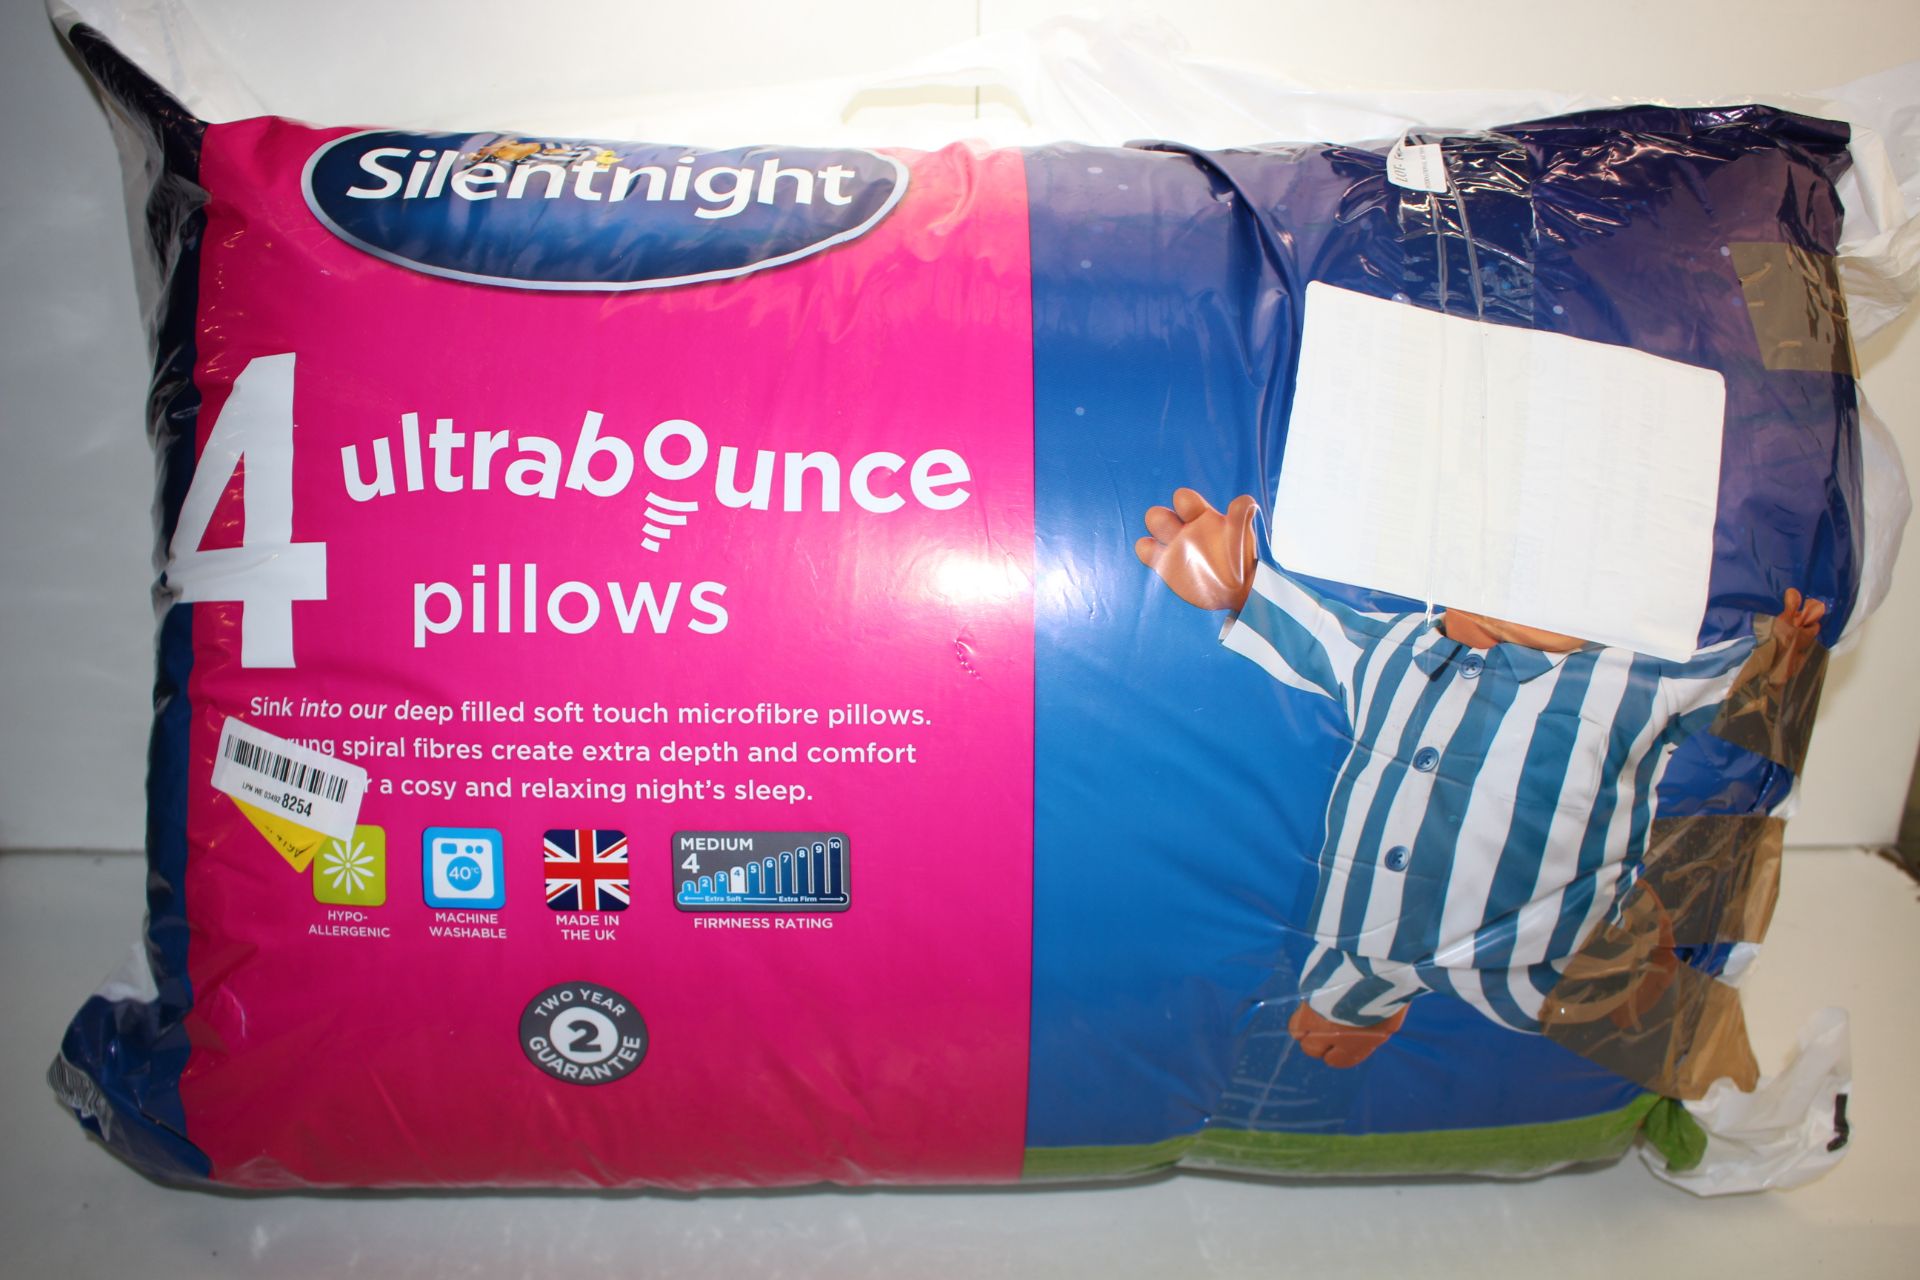 4X BAGGED SILENTNIGHT ULTRABOUNCE PILLOWS RRP £24.99Condition ReportAppraisal Available on